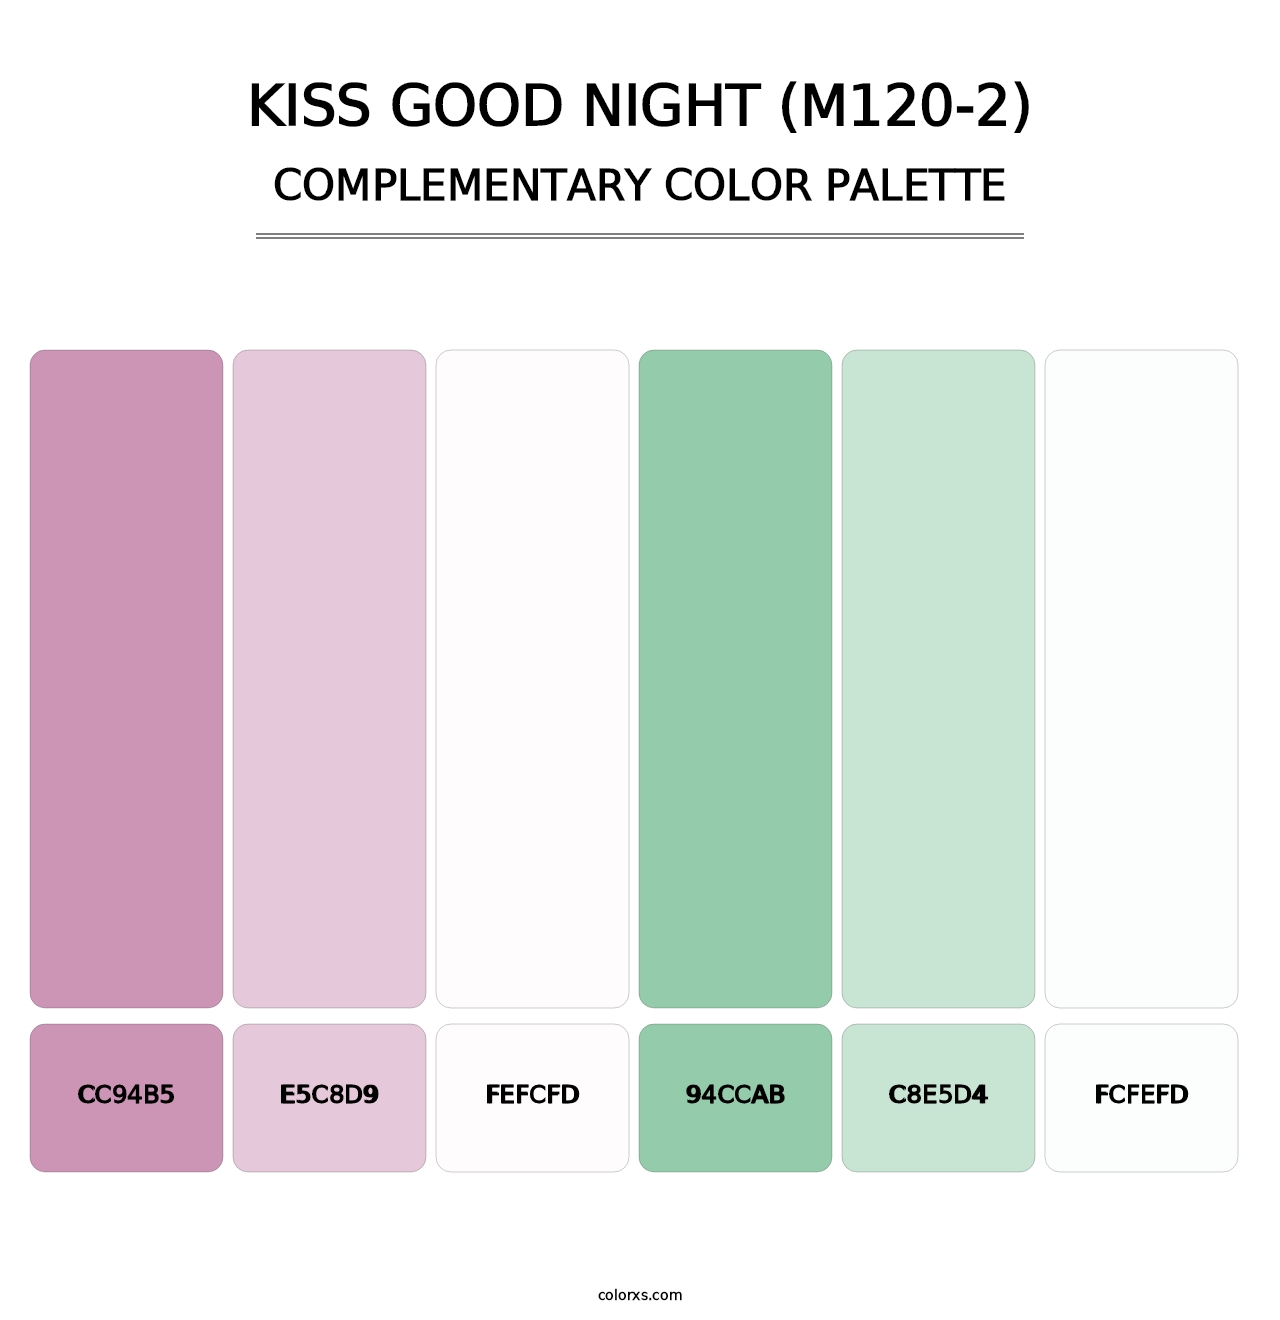 Kiss Good Night (M120-2) - Complementary Color Palette